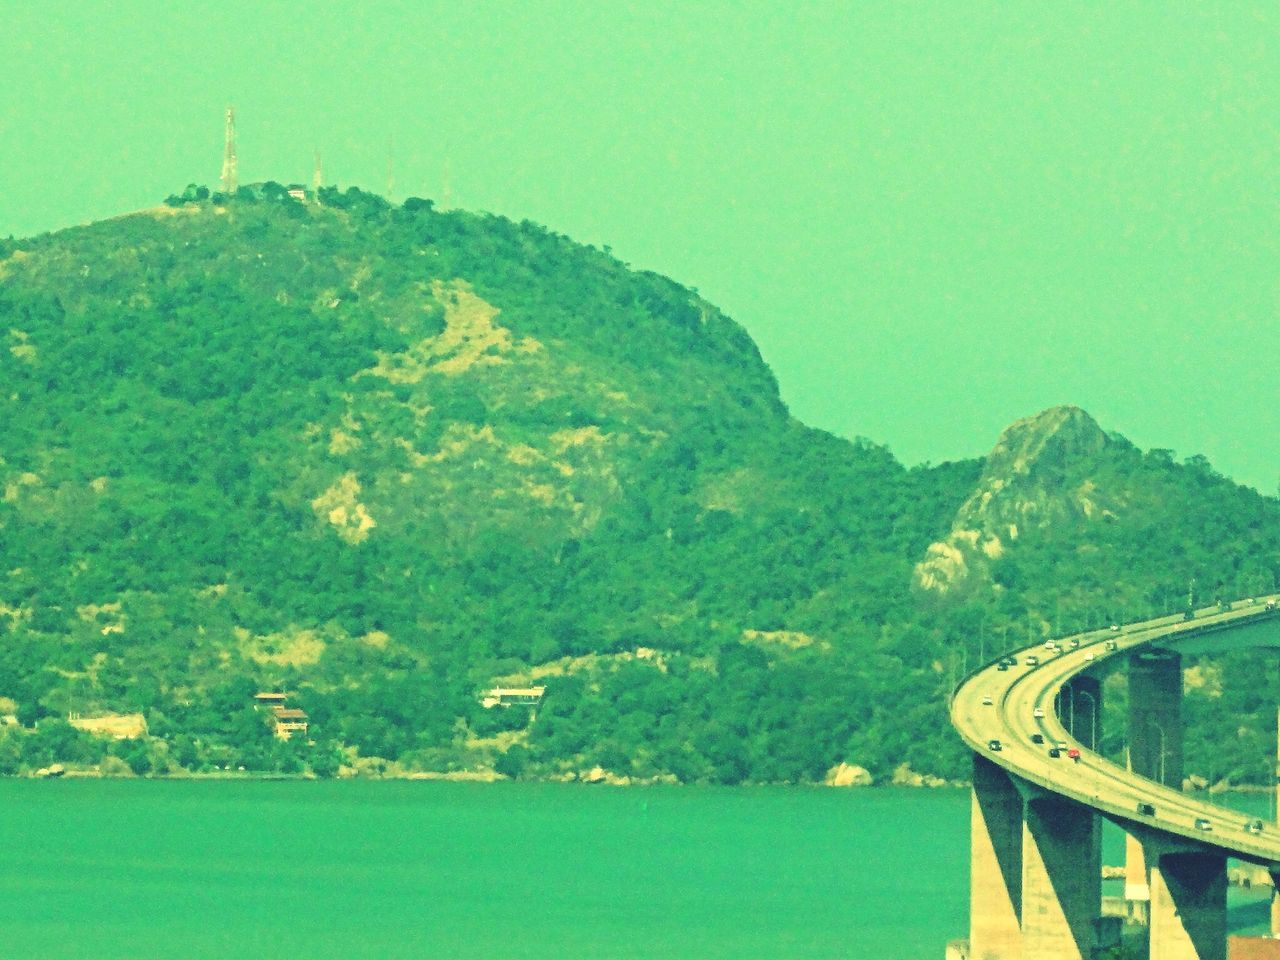 mountain, water, clear sky, connection, tranquility, transportation, tranquil scene, scenics, beauty in nature, nature, built structure, bridge - man made structure, blue, copy space, green color, river, landscape, day, mountain range, architecture